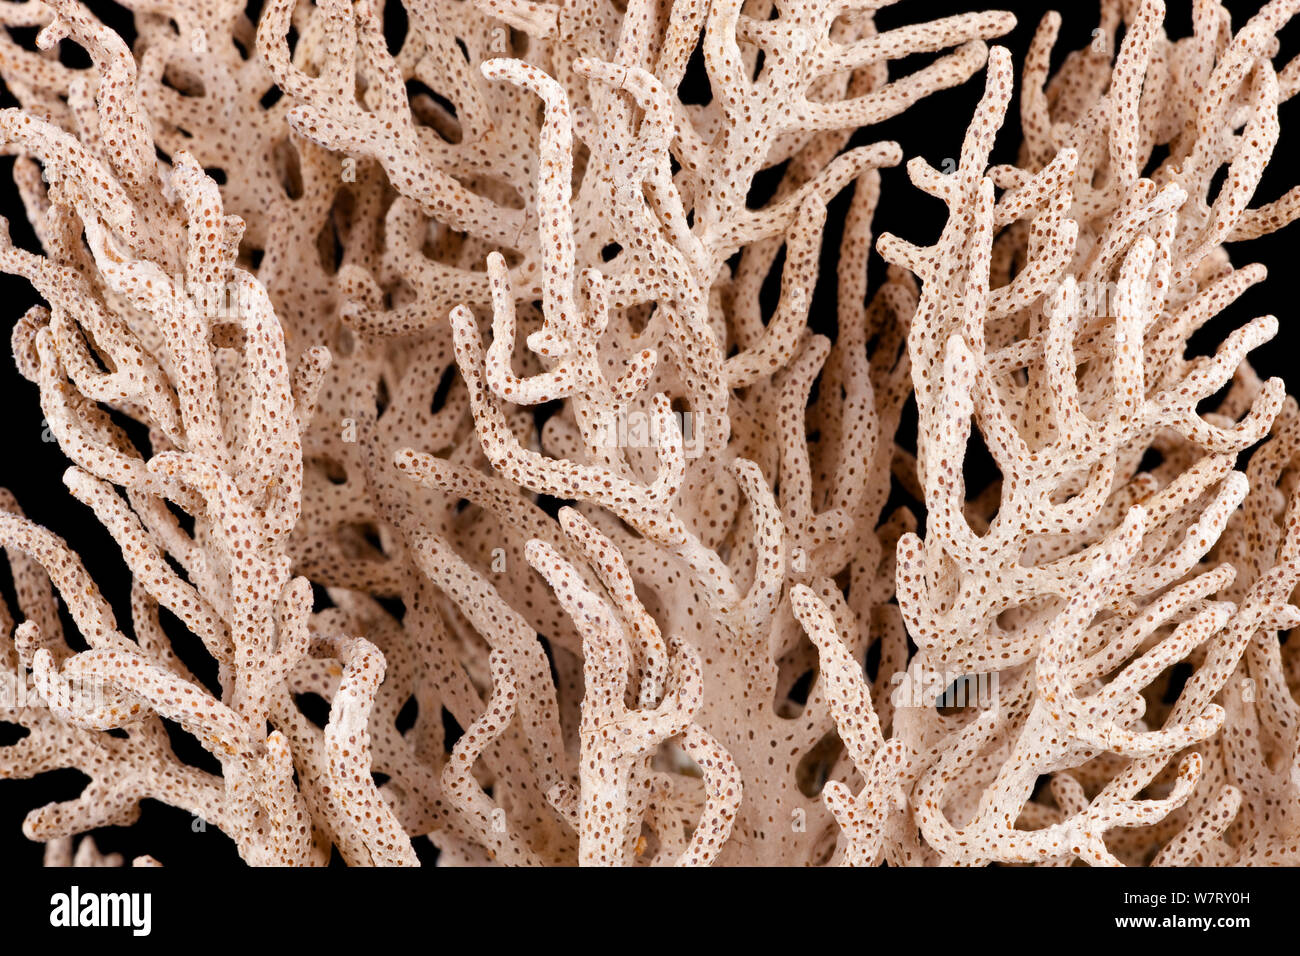 Fan Coral from Renard Island in collection at Senckenberg Museum, Frankfurt, Germany. Stock Photo